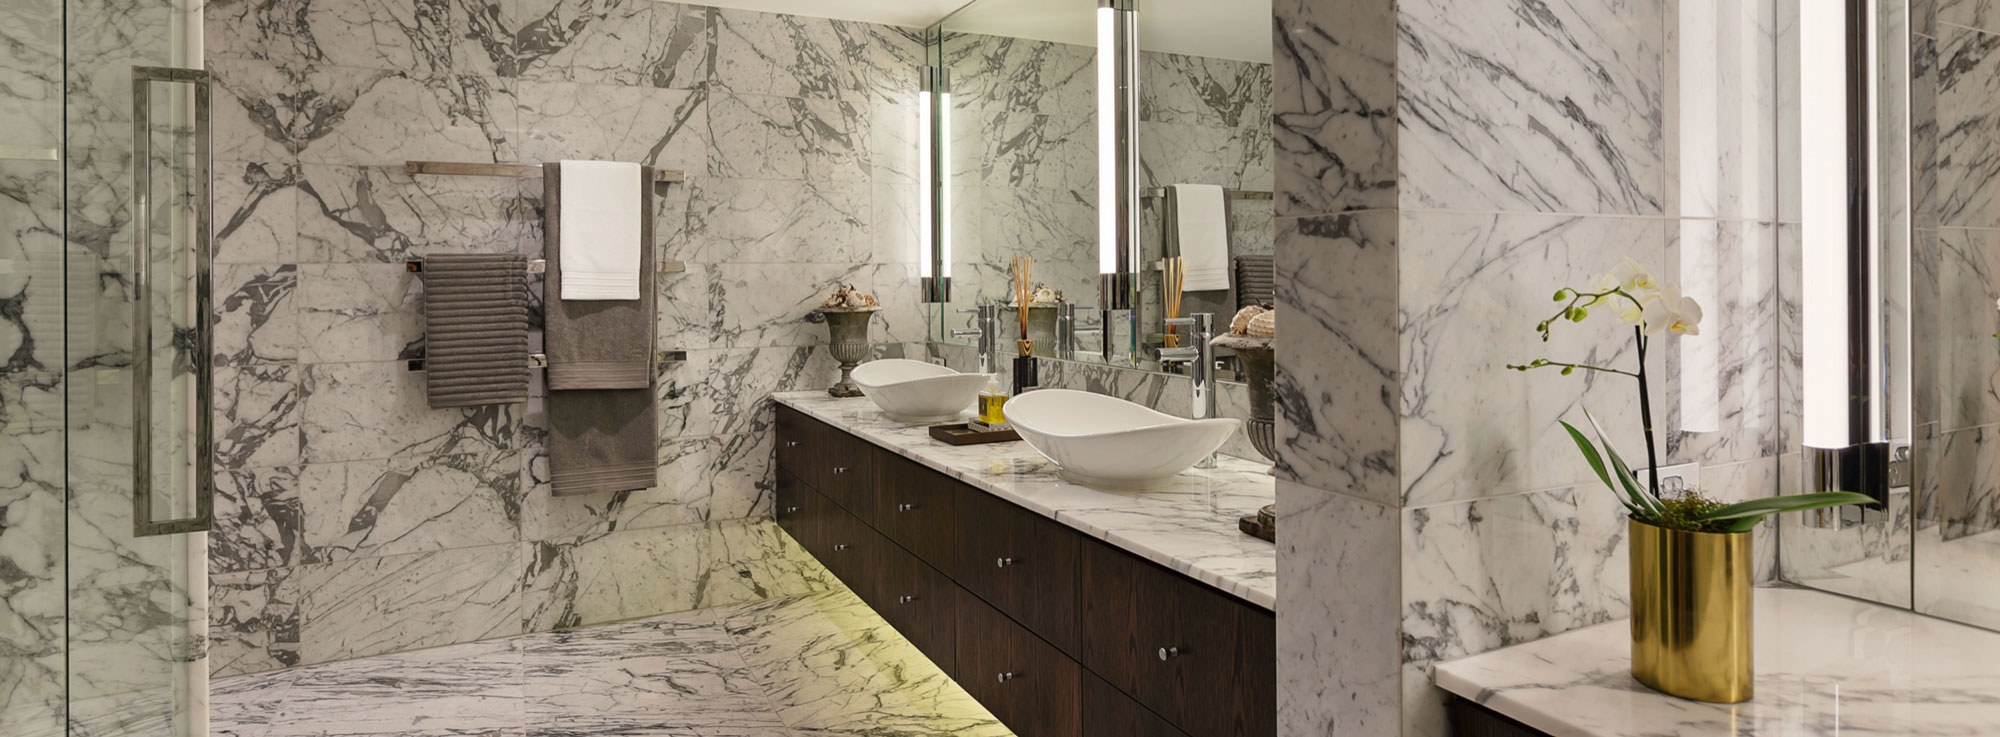 Master Ensuite with Floor to Ceiling Carrara Marble Bathroom & Double Vanities | Point Residence Luxury Auckland Waterfront Apartment